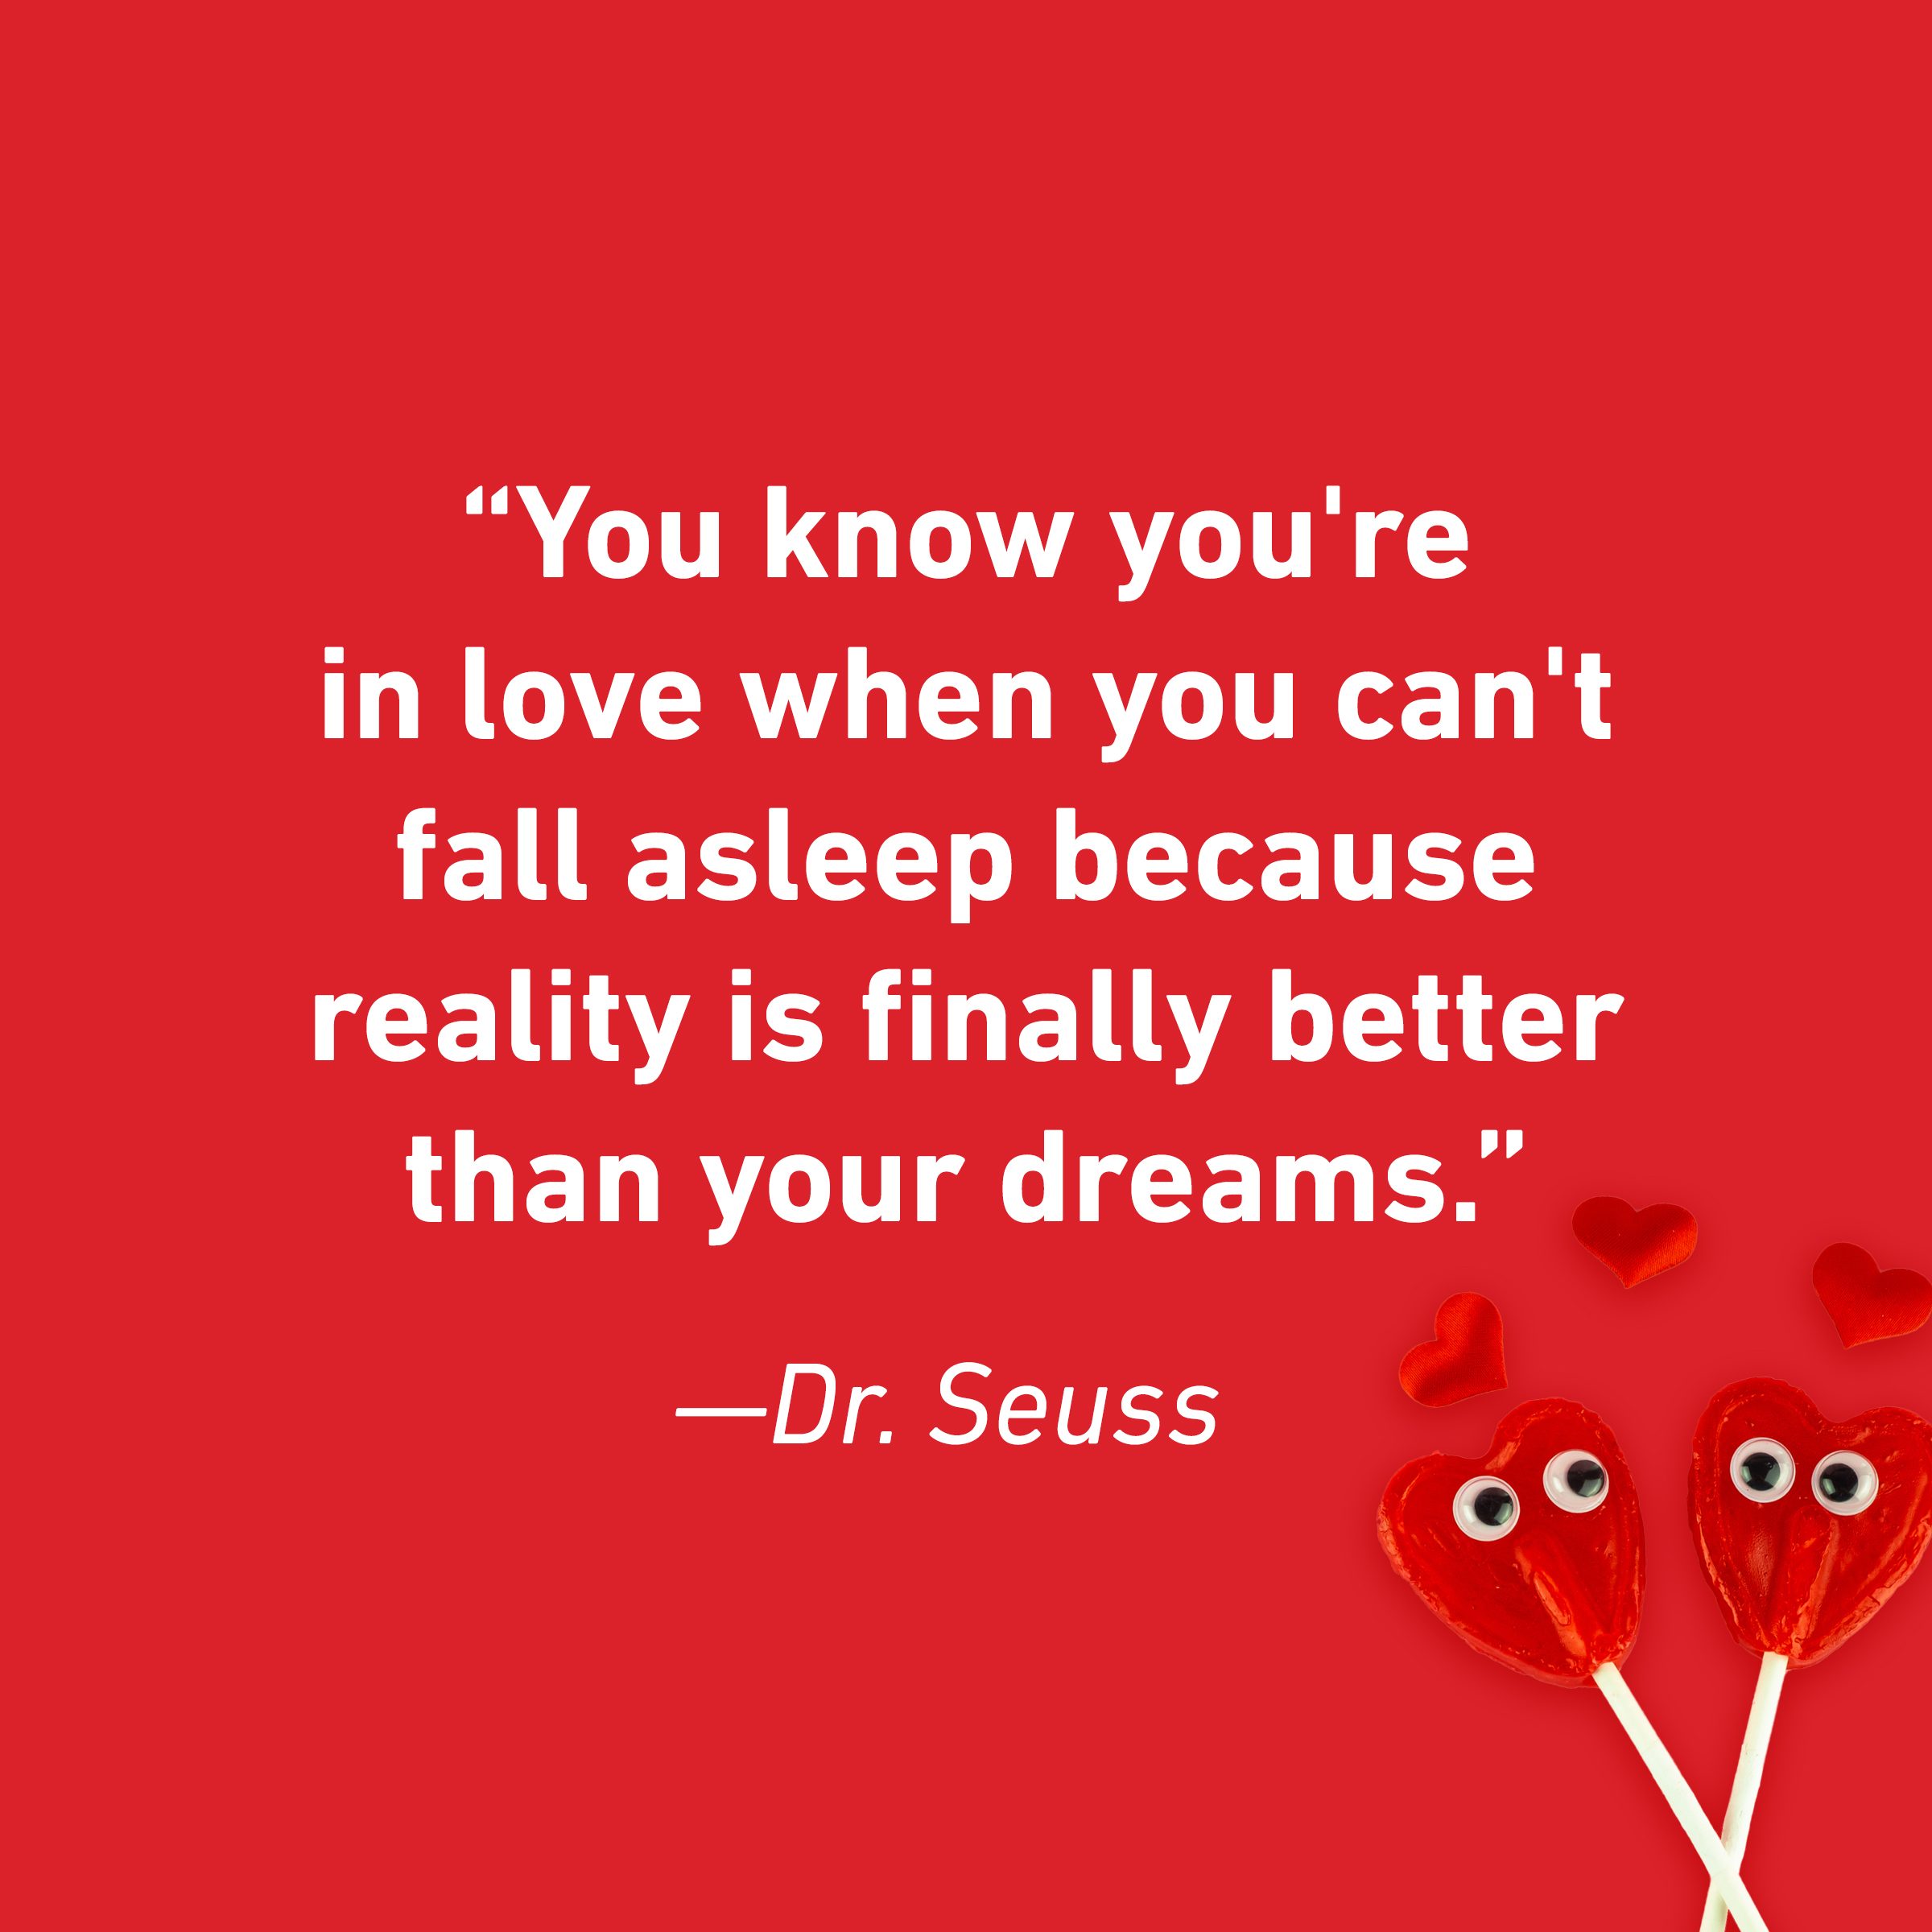 74 Relationship Quotes That Celebrate Love and Romance